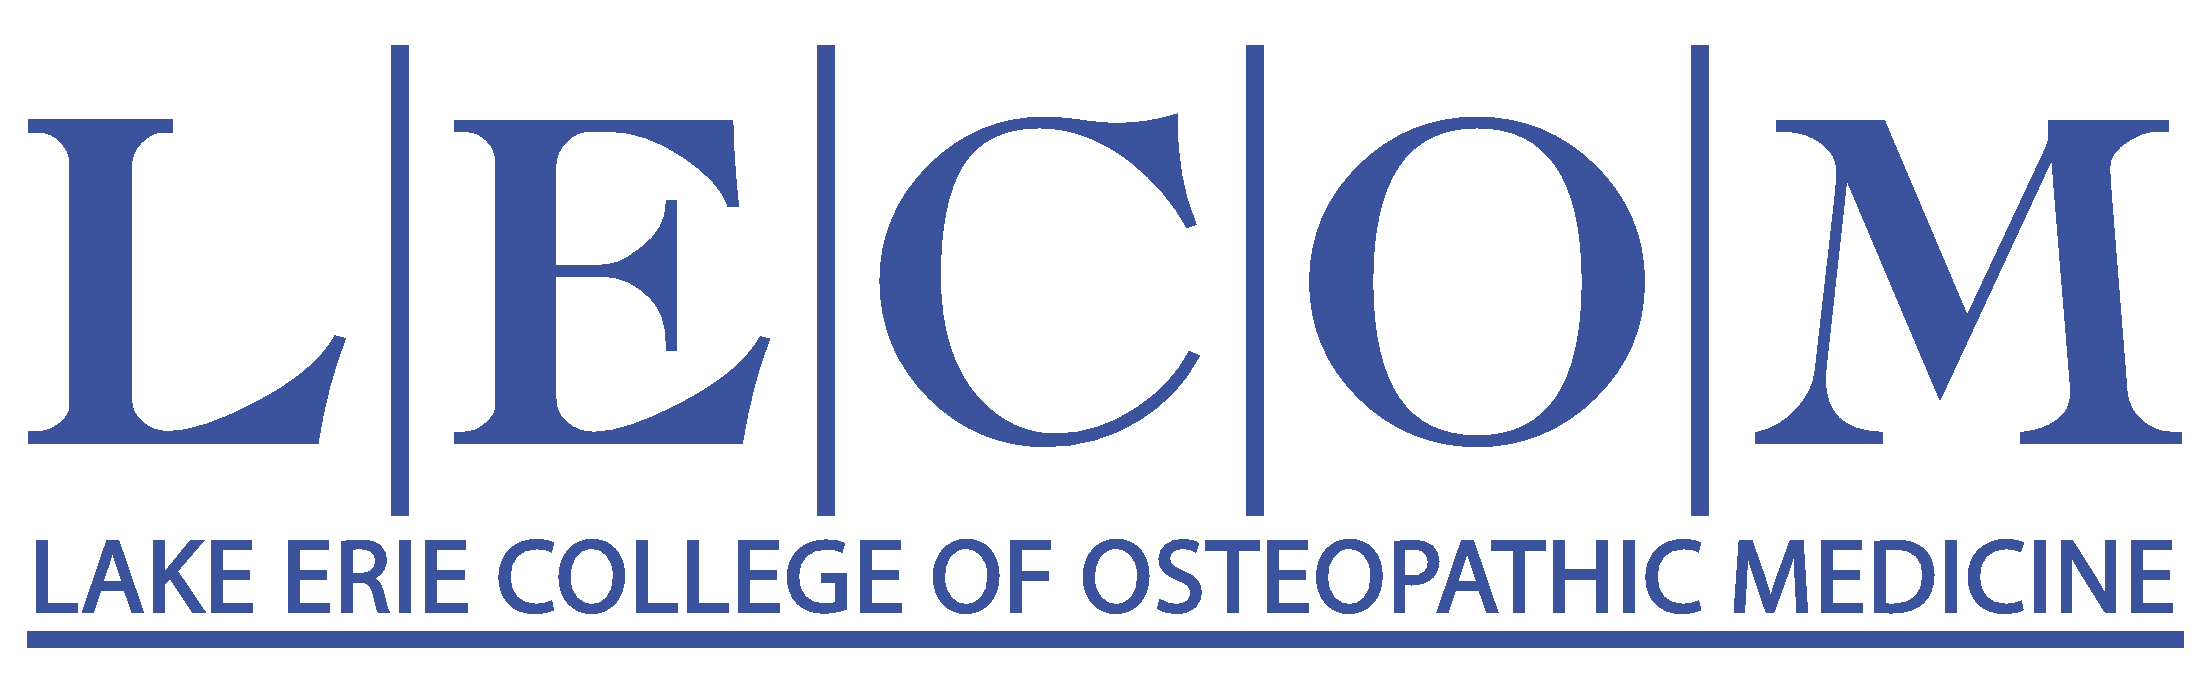 Lake Erie College of Osteopathic Medicine